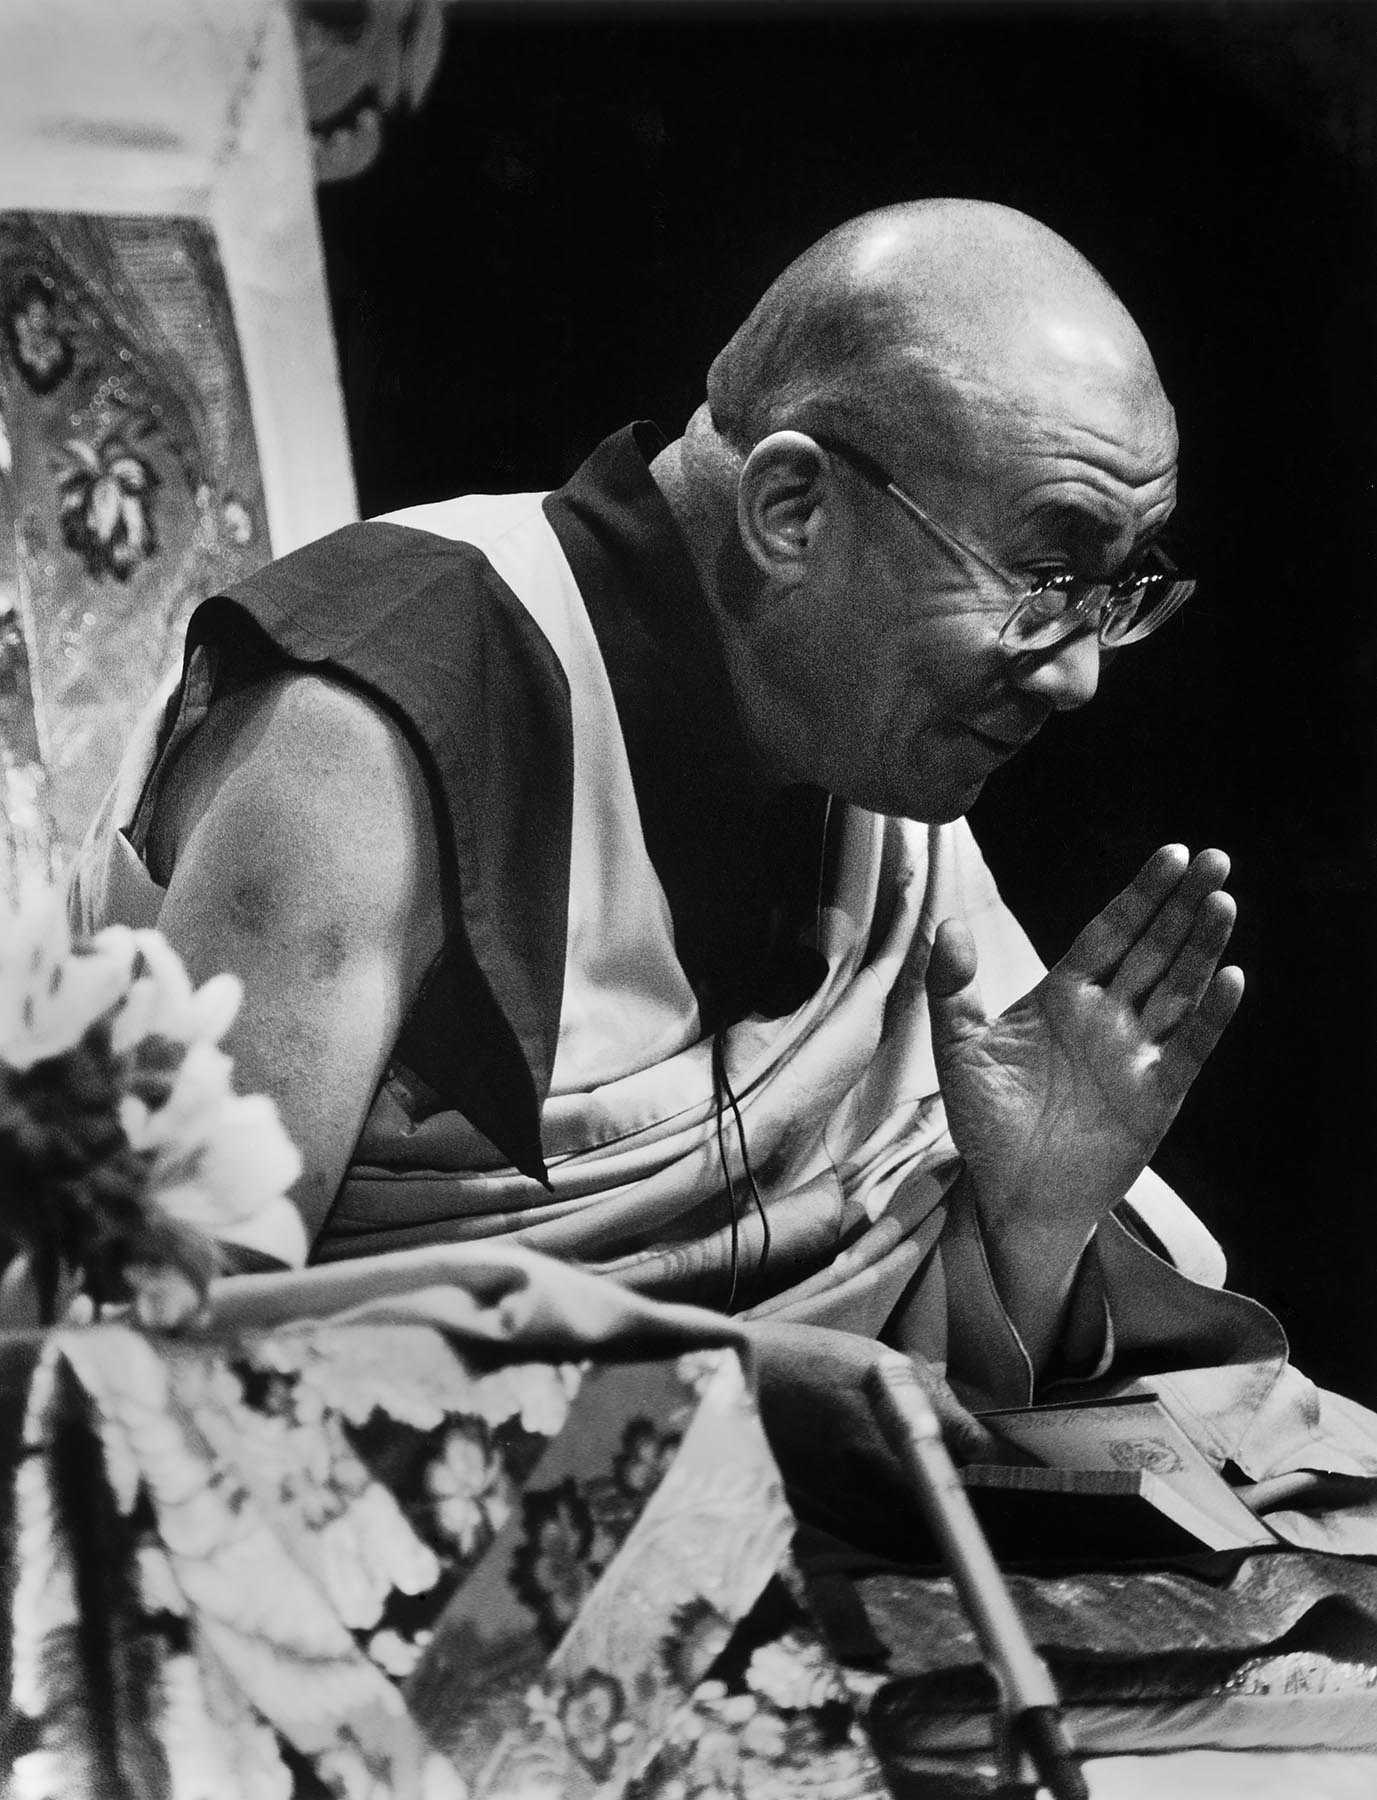 His Holiness THE 14TH DALAI LAMA of TIBET gives BUDDHIST TEACHINGS in Los Angeles California in 2000